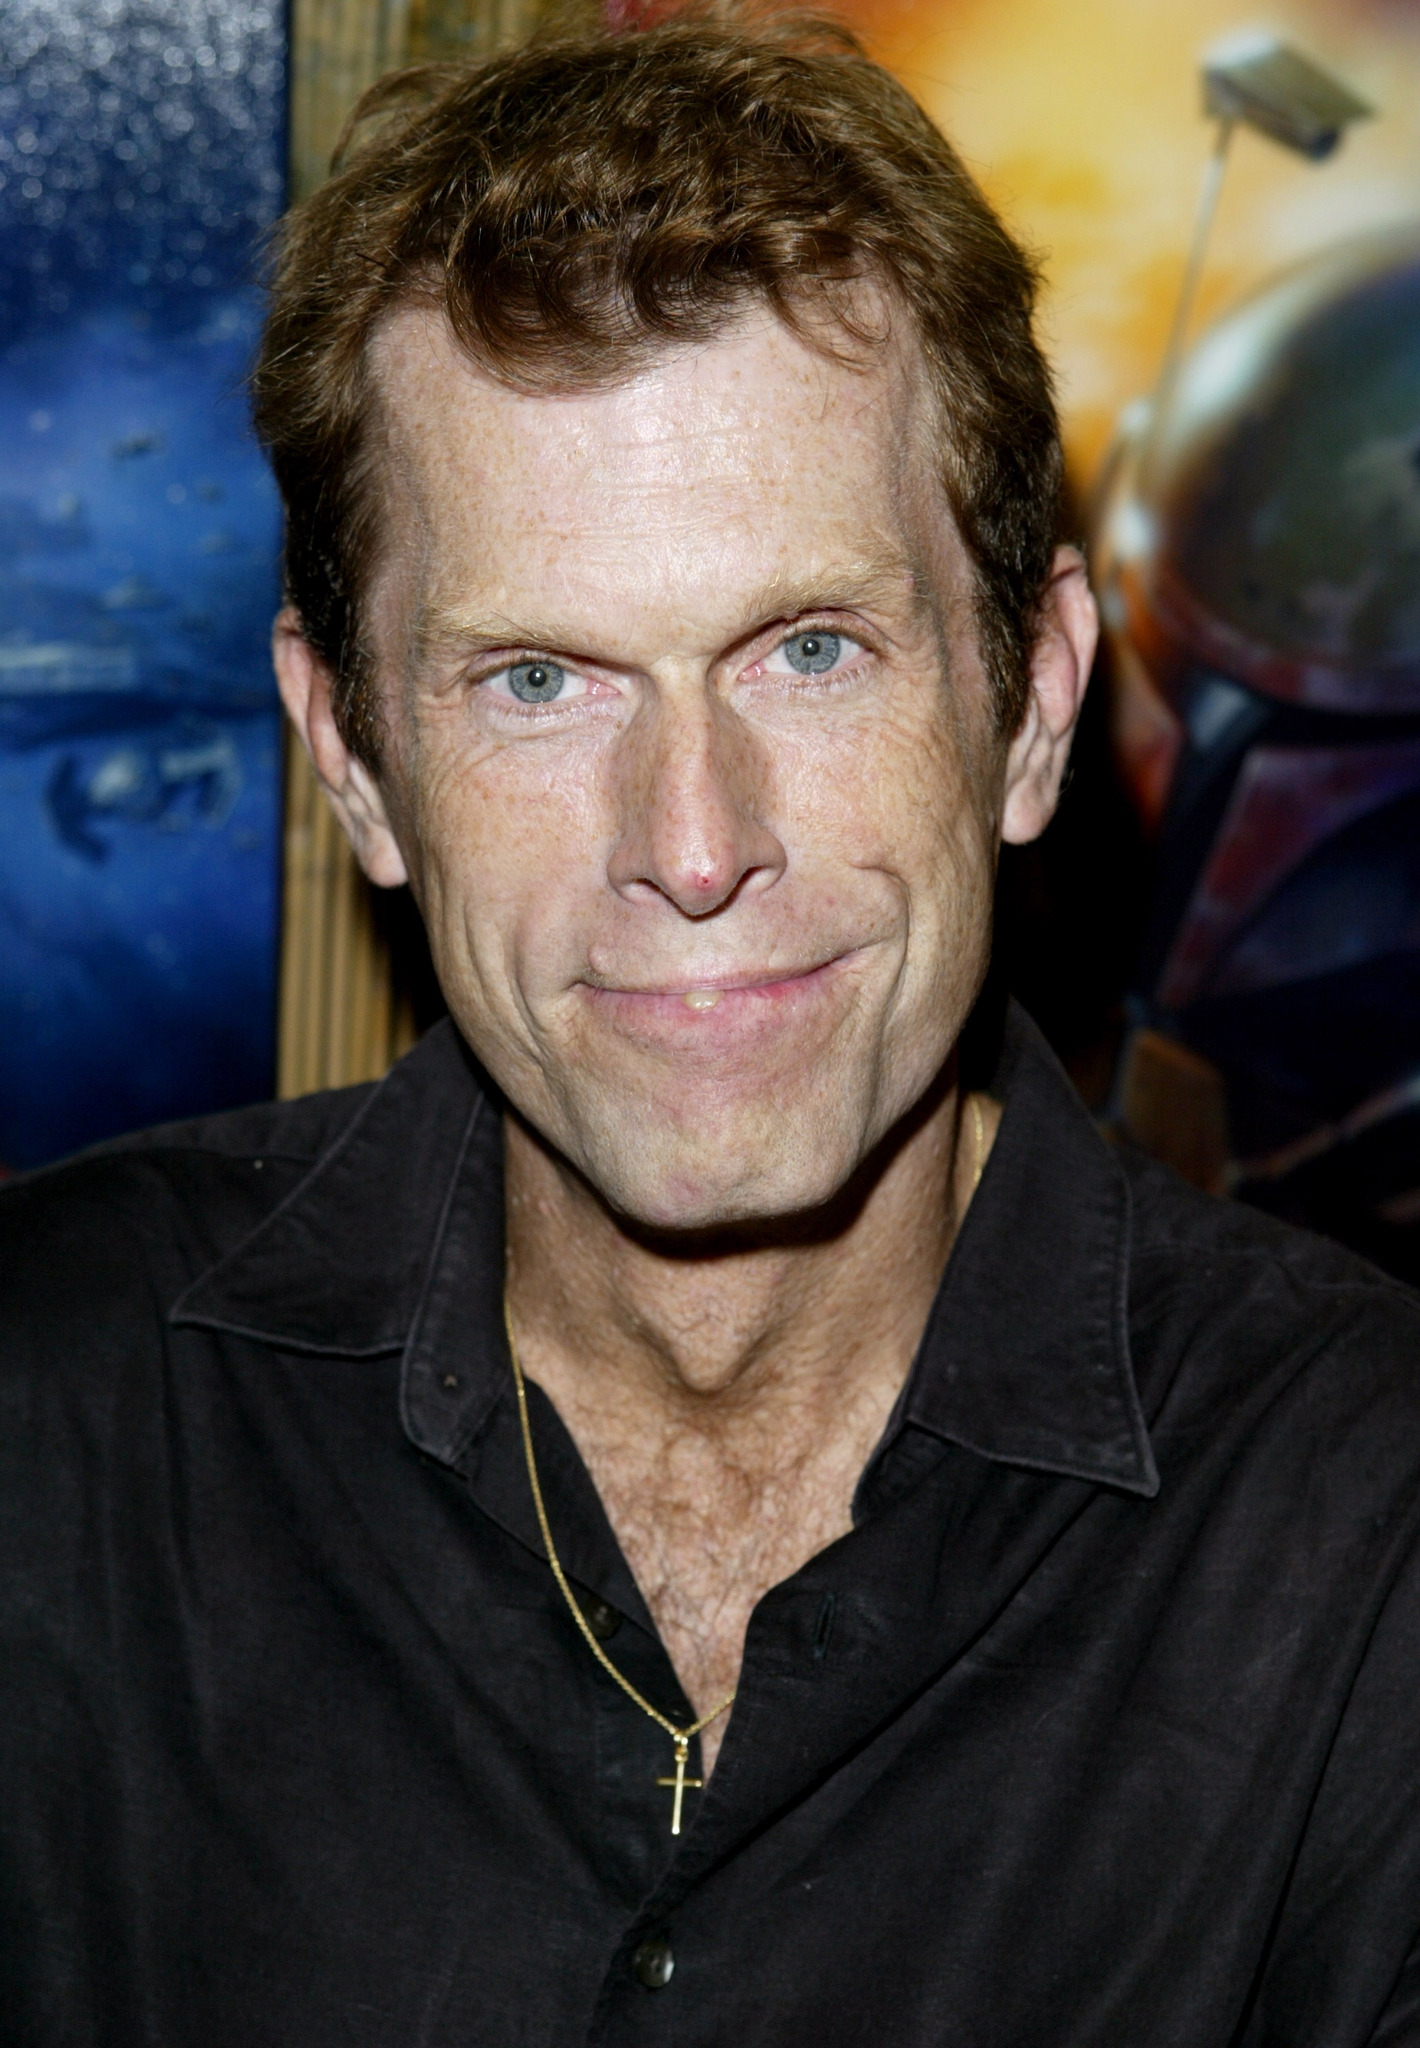 Kevin Conroy on X: In honor of #oldheadshotsday, I found this one of me at  20!  / X